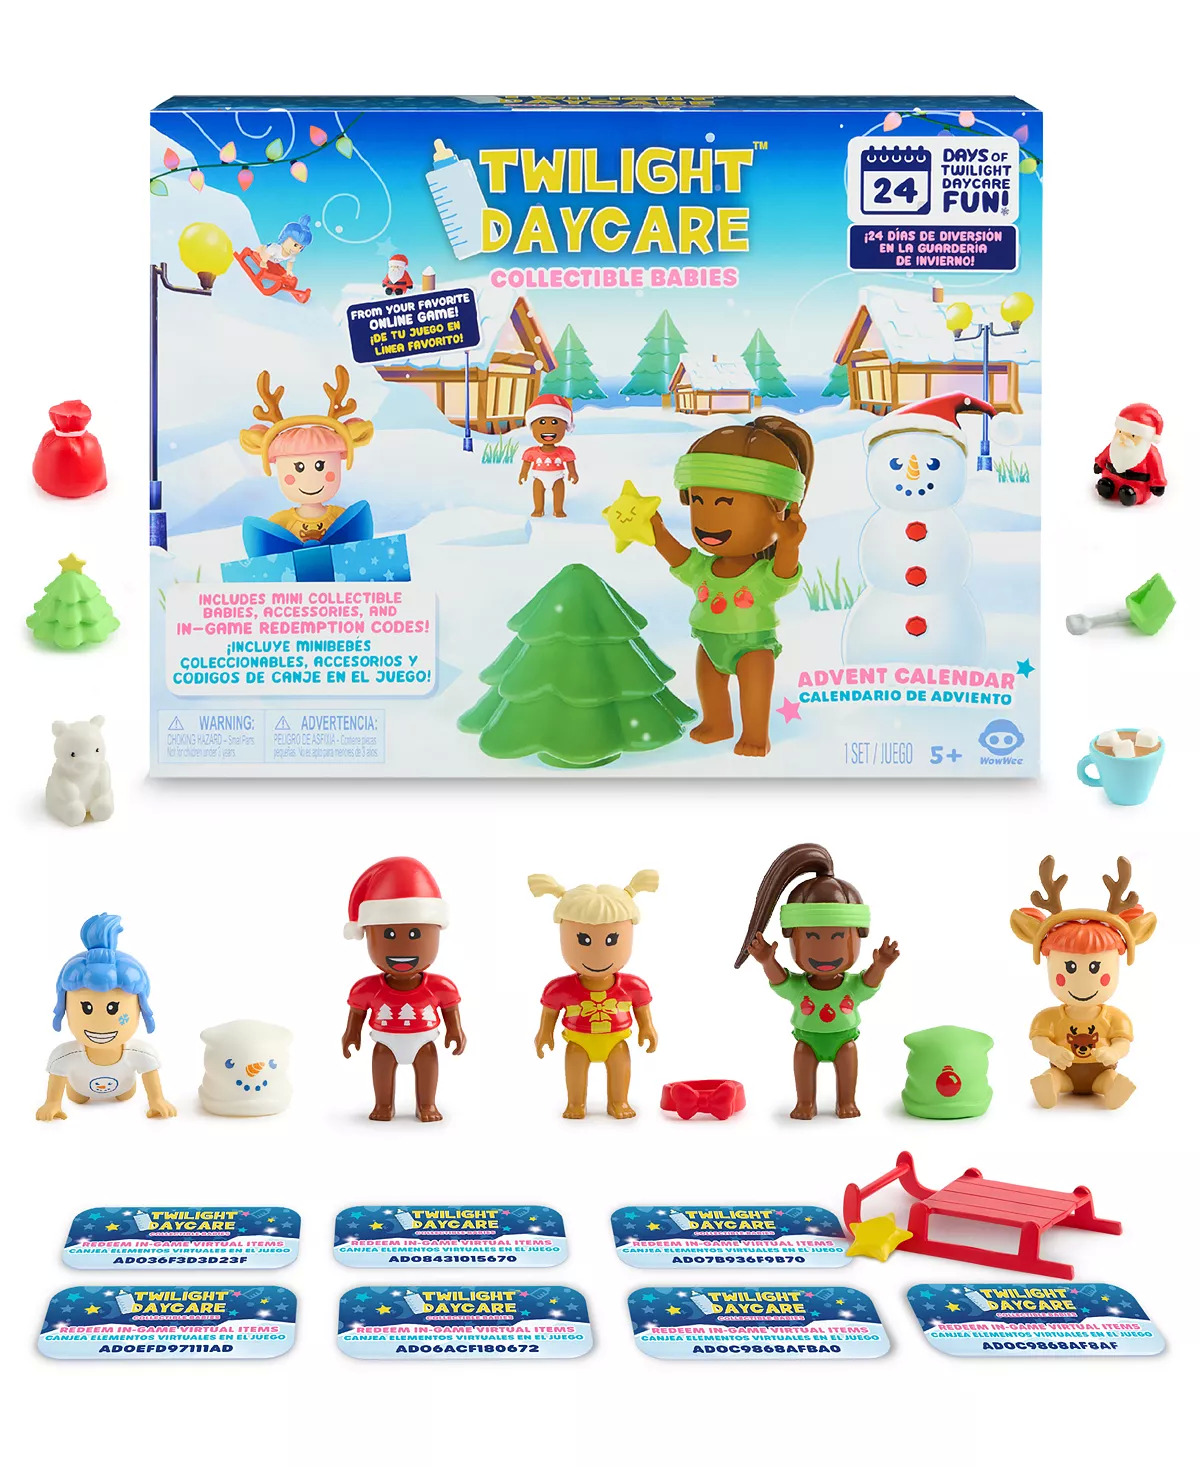 24-Piece Twilight Daycare Macy's Advent Calendar Set $11.96, Holiday Lane Polar Bear LED Christmas Countdown Calendar $14.83 + Free Store Pickup at Macy's or Free Shipping on $25+